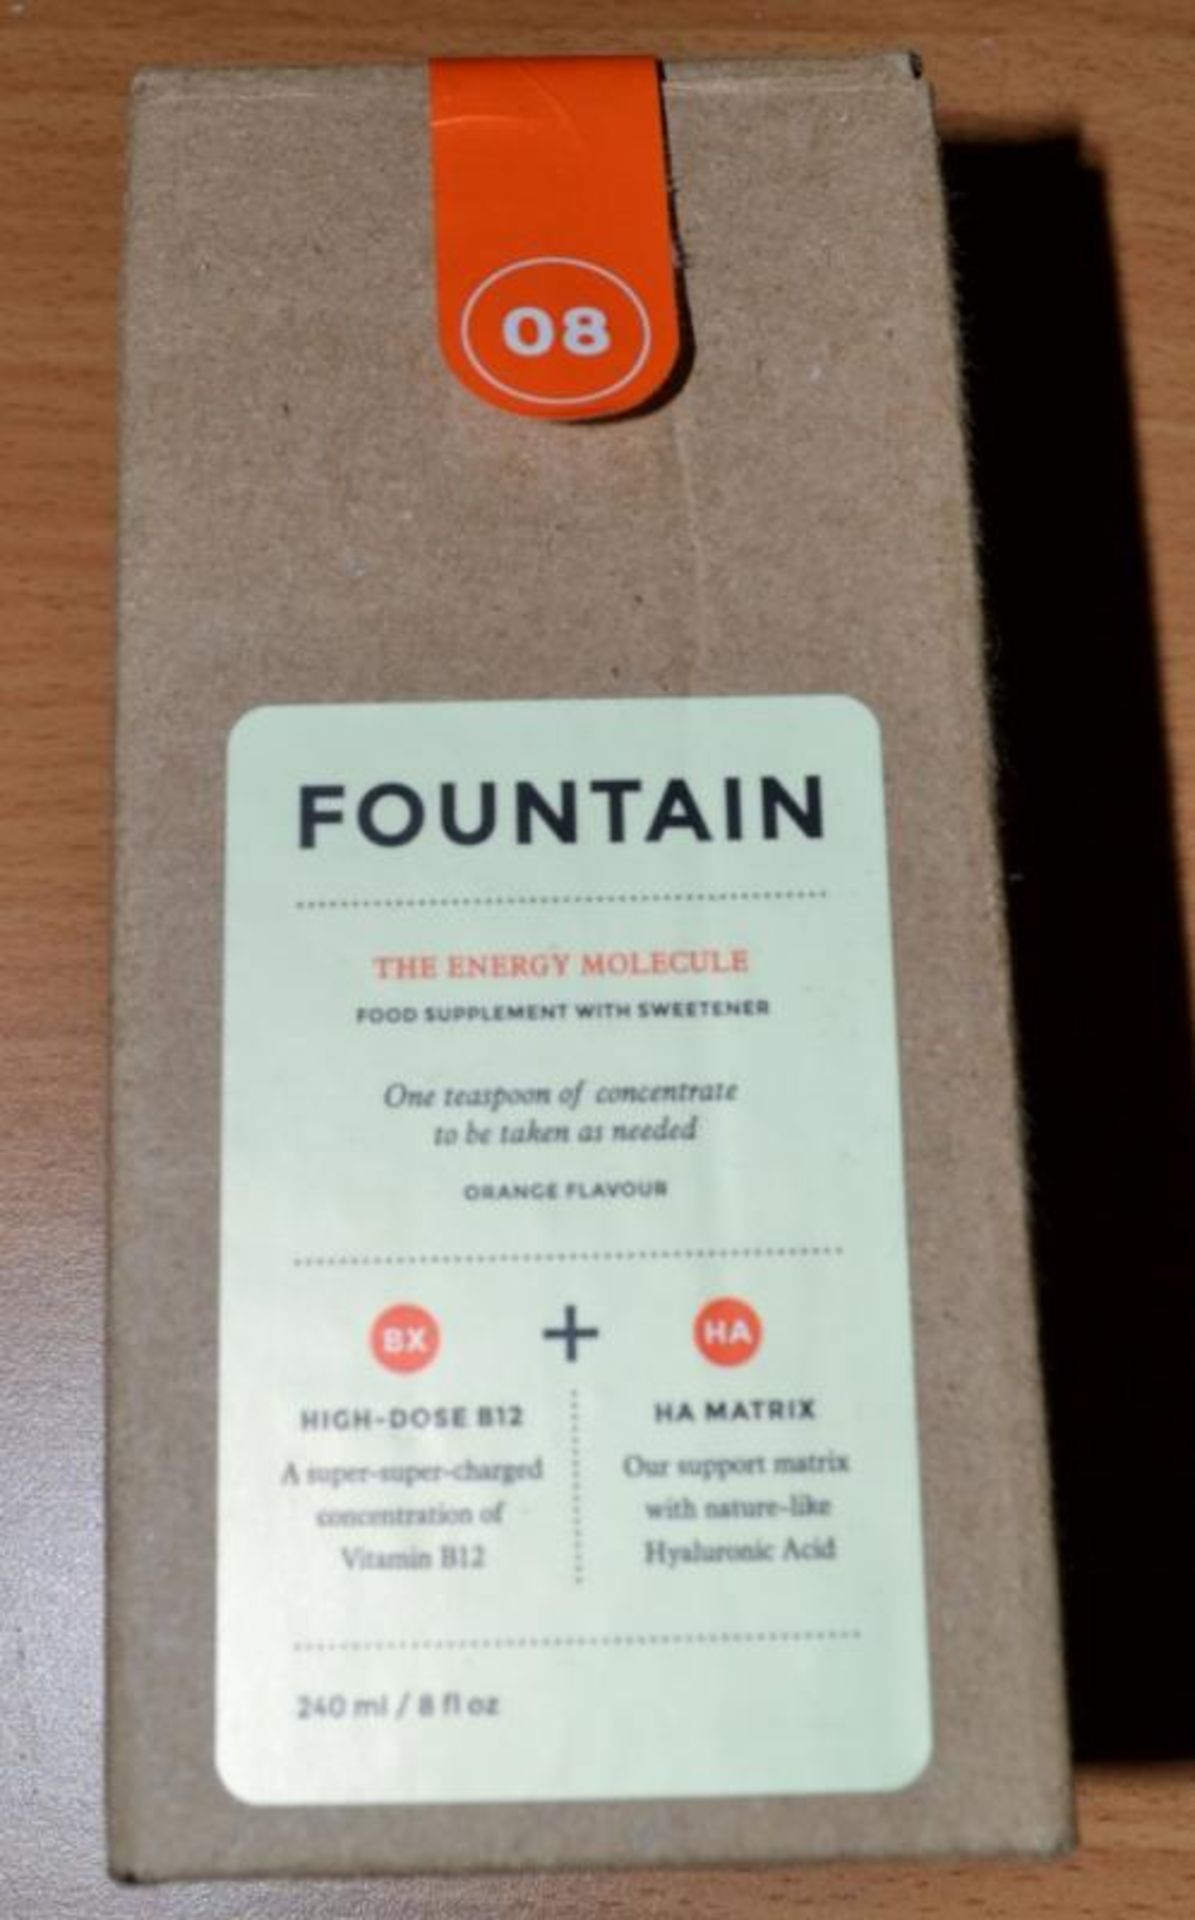 10 x 240ml Bottles of Fountain, The Energy Molecule Supplement - New & Boxed - CL185 - Ref: - Image 6 of 7